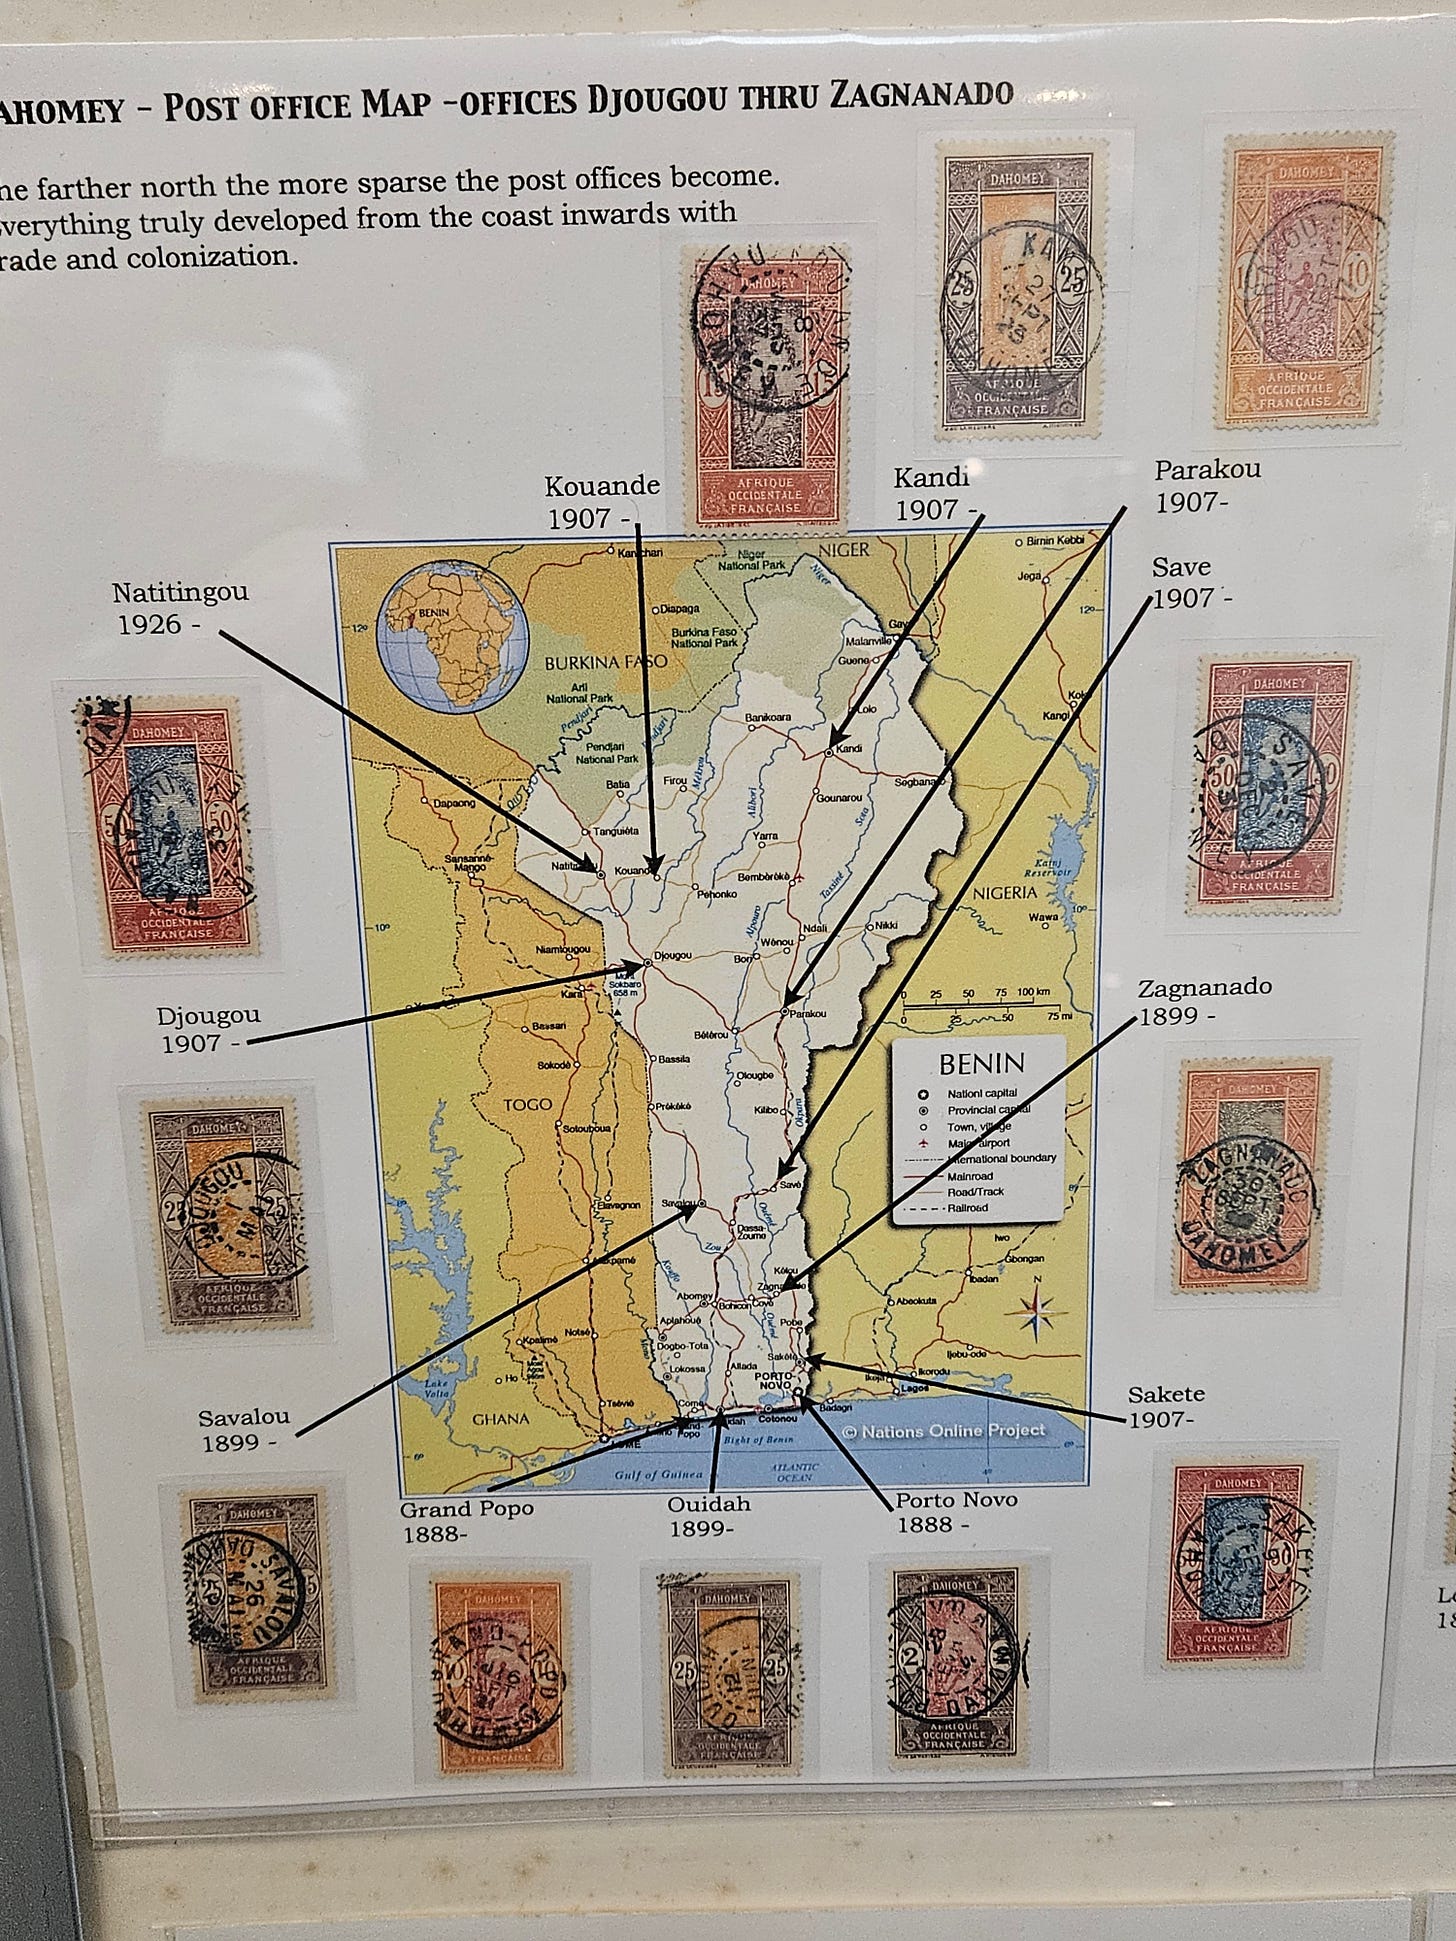 exhibit page with a map